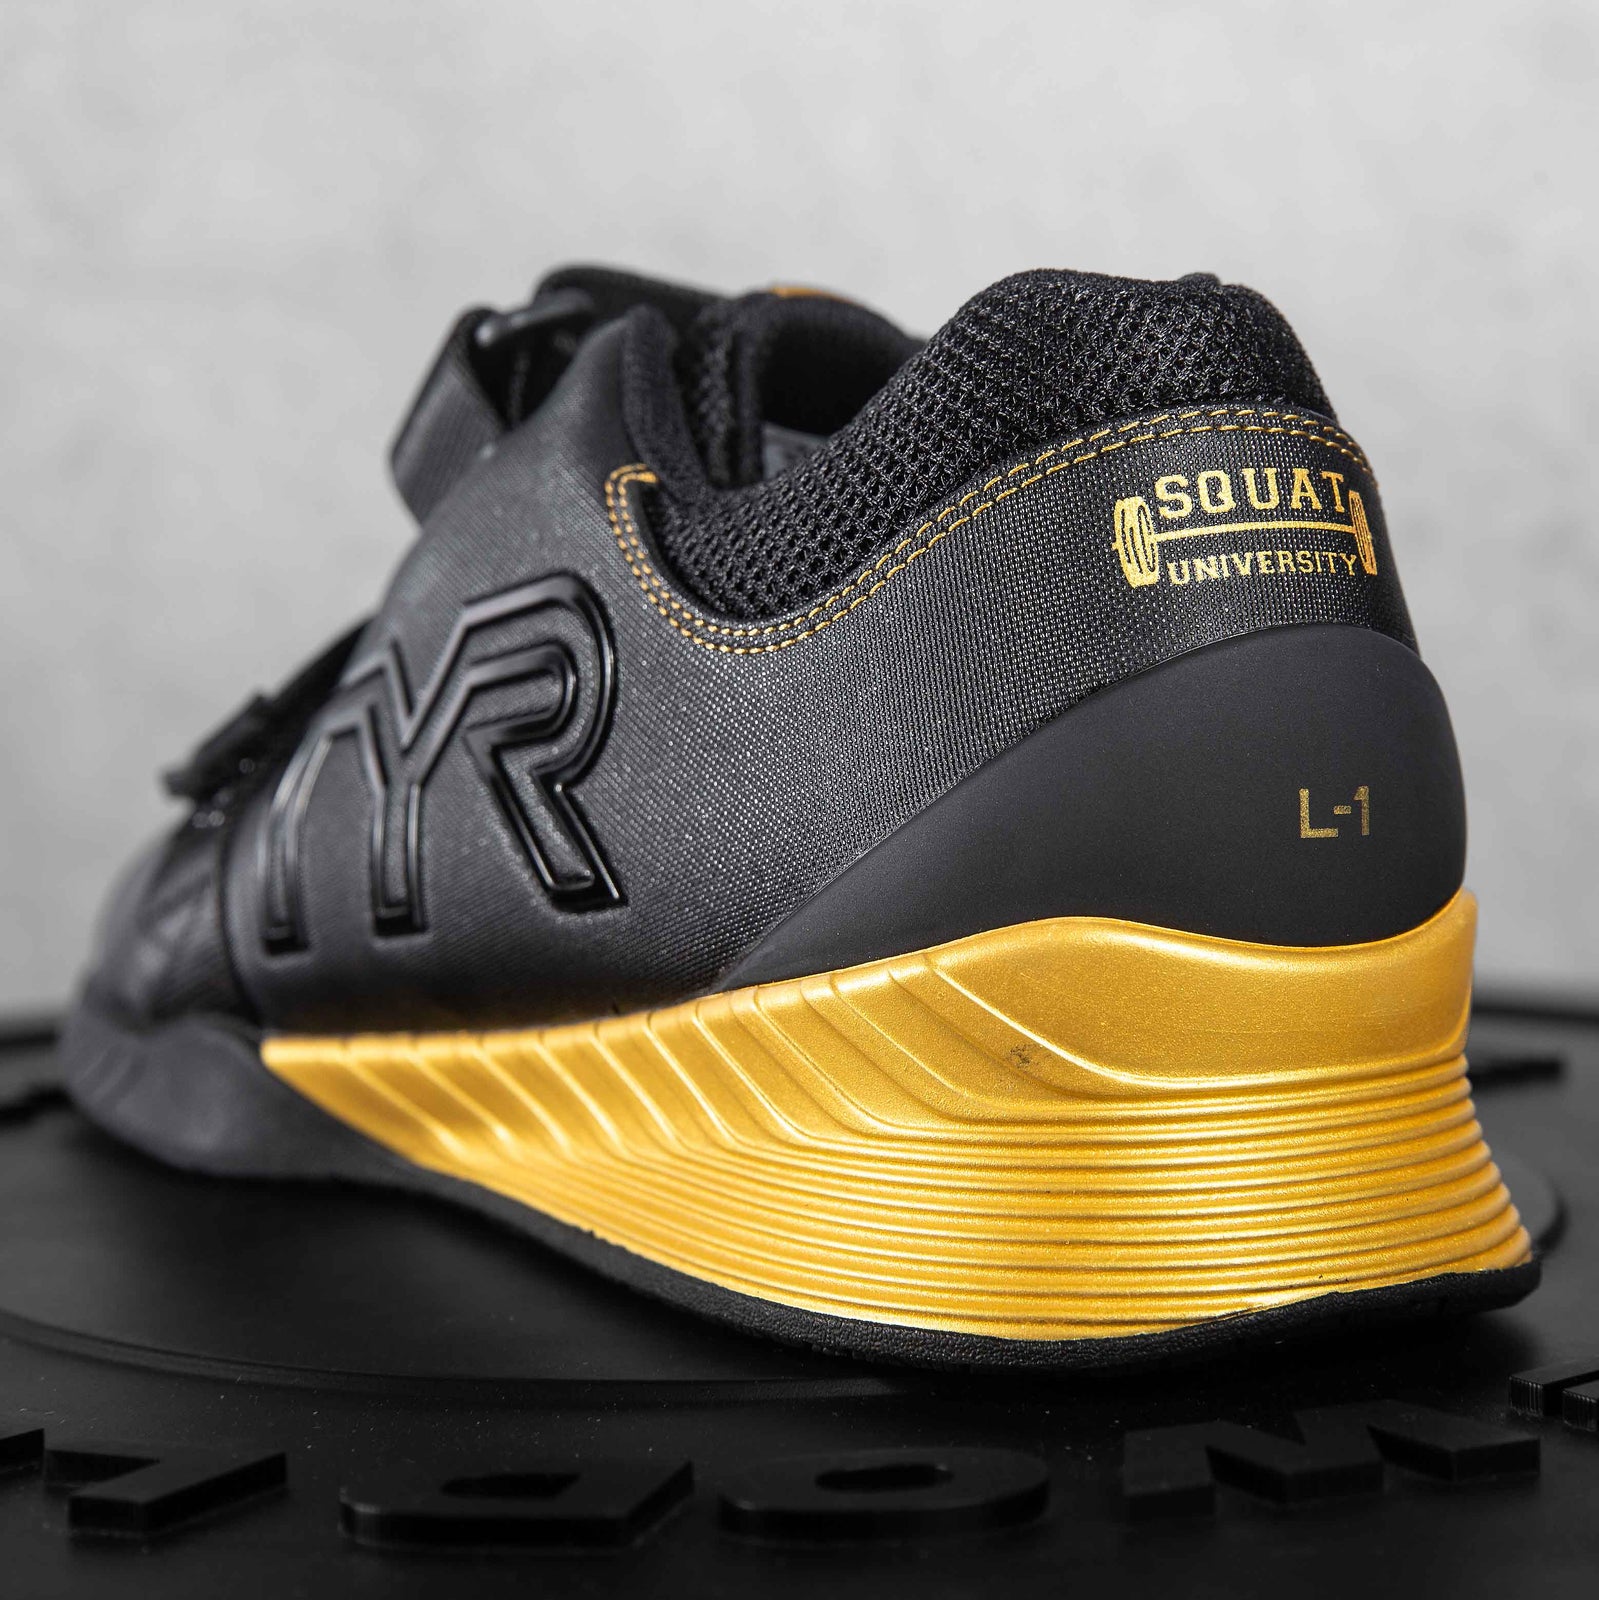 TYR Sport, Back in Stock! The First-Ever Anatomical Toe Box Lifting Shoe -  The L-1 Lifter - designed and engineered in collaboration with Squat  Univ